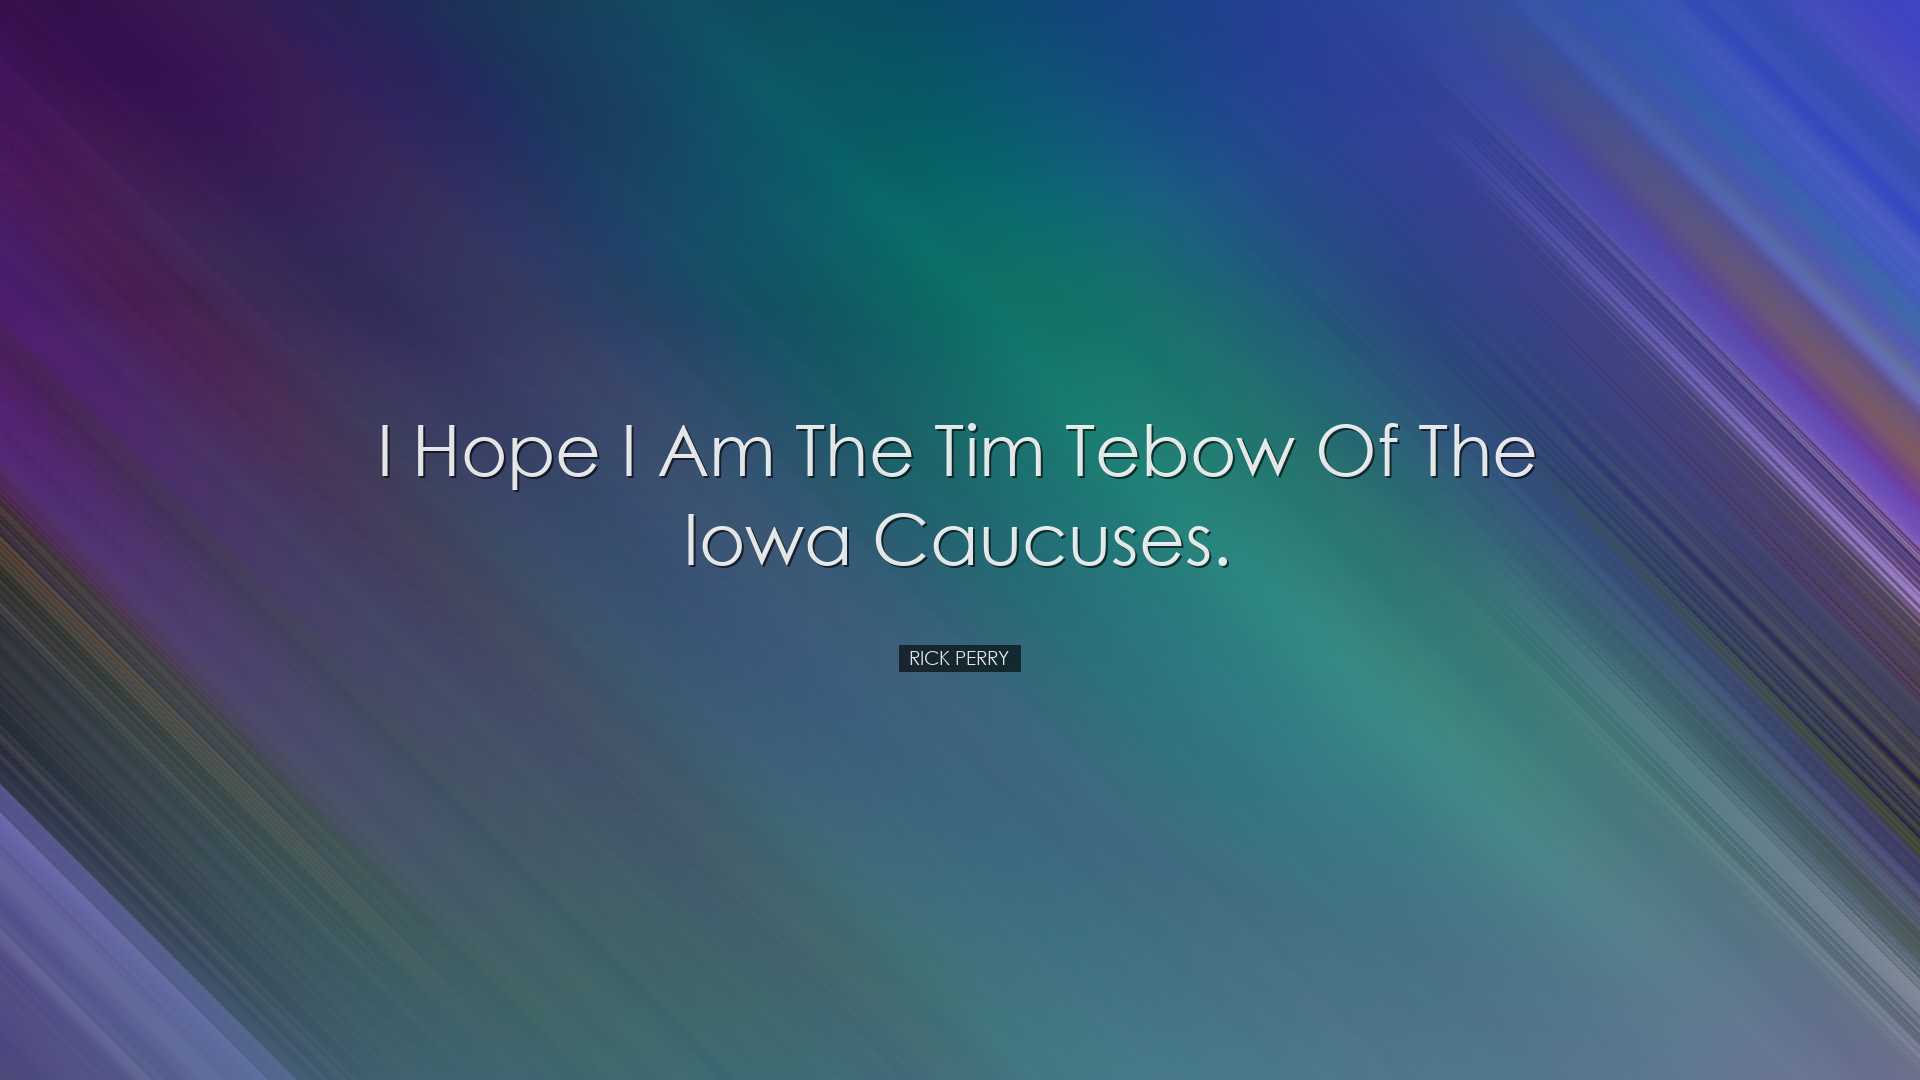 I hope I am the Tim Tebow of the Iowa caucuses. - Rick Perry